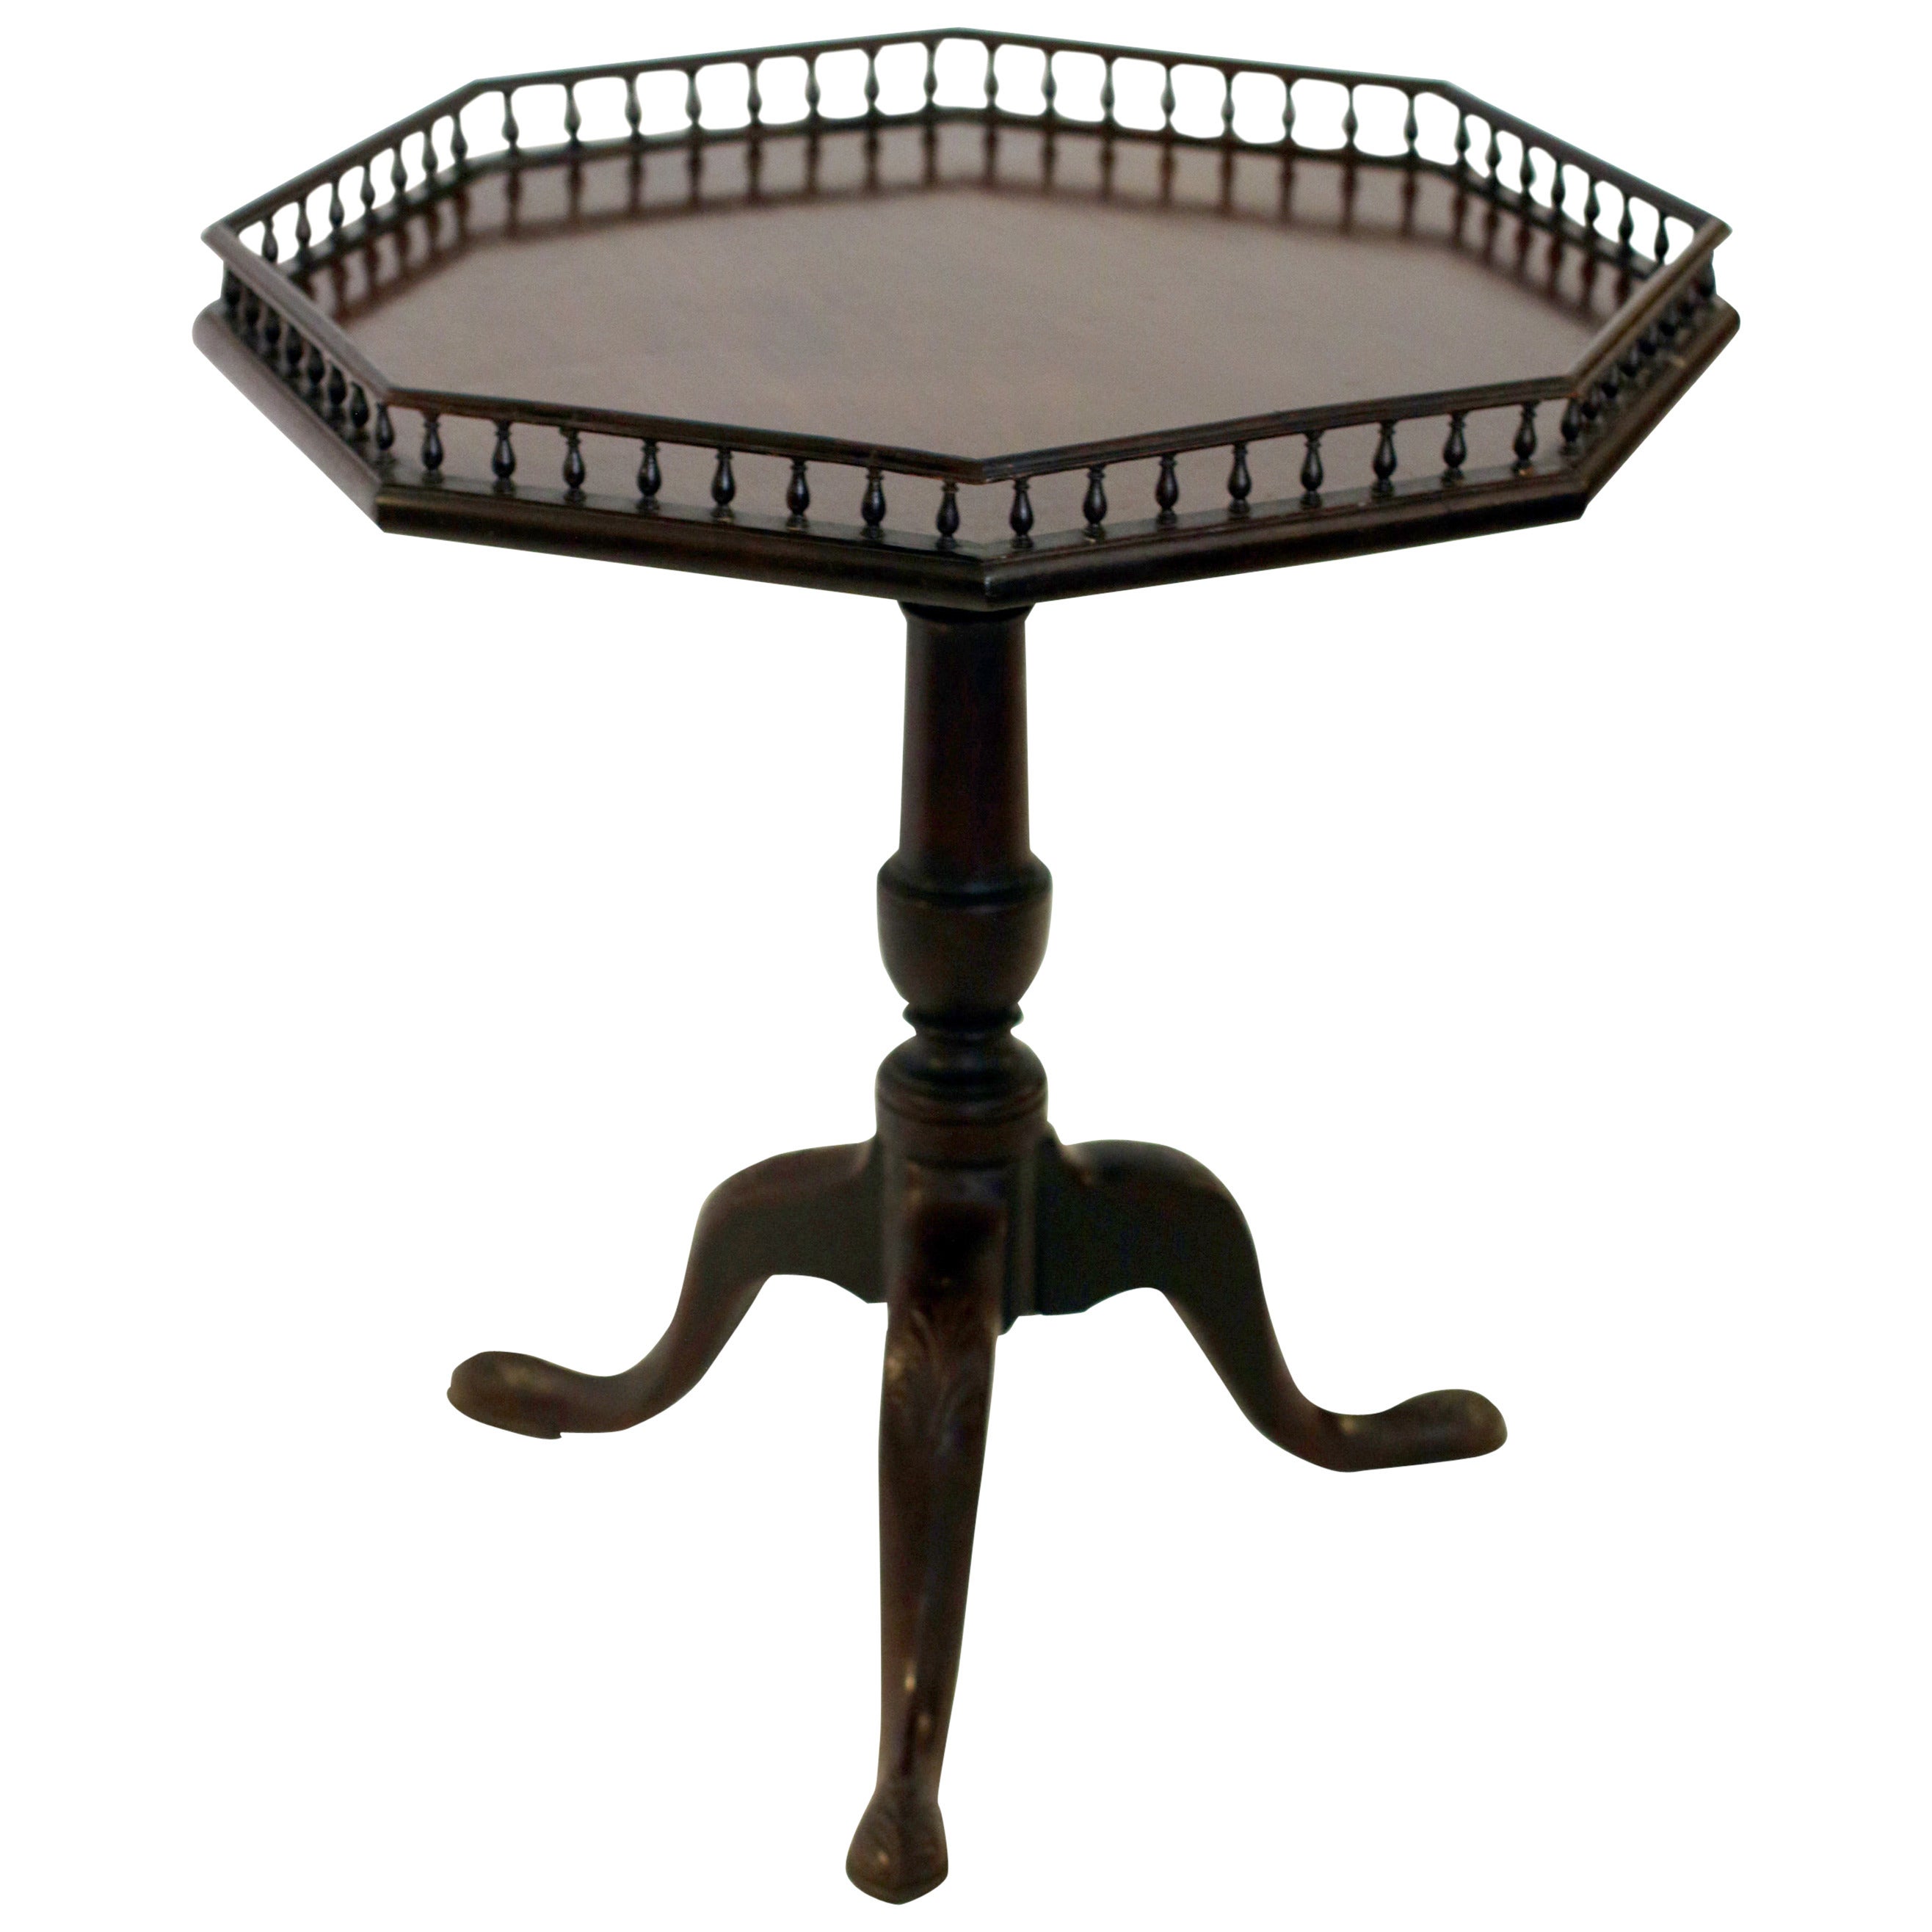 18th century Chippendale Mahogany Tilt-Top Table